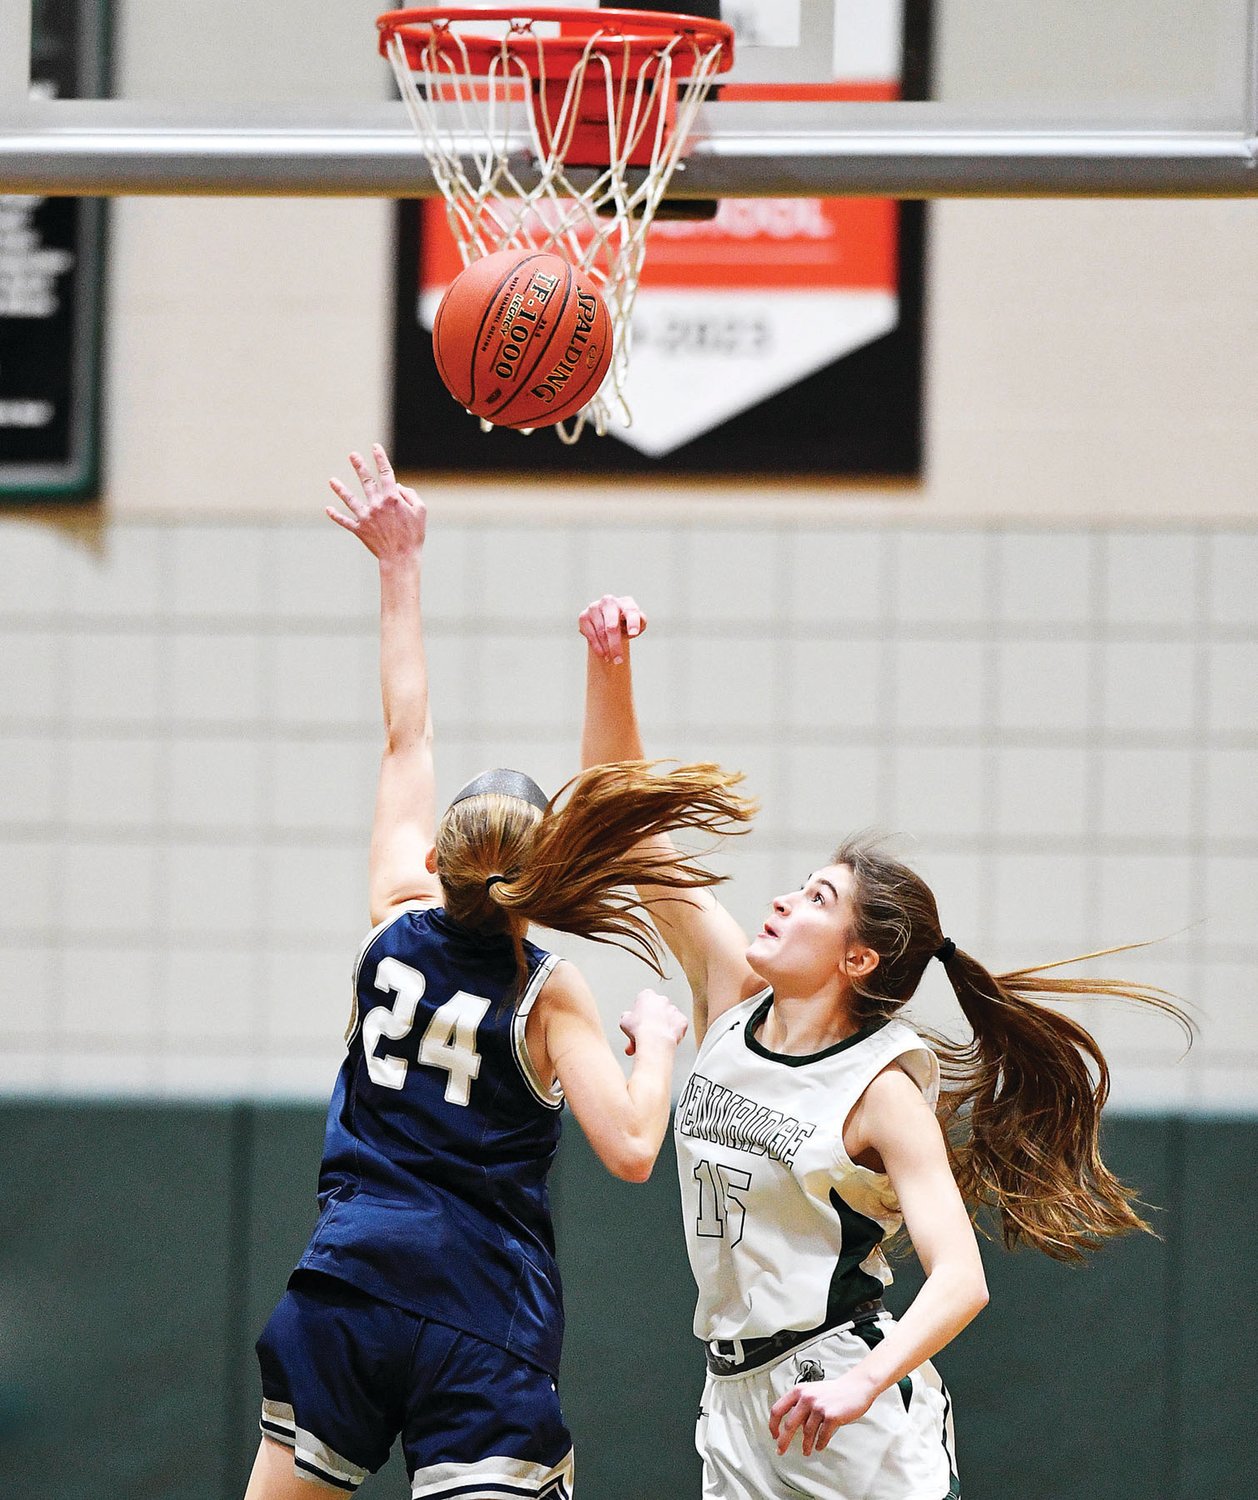 Pennridge cranked up the defense in the second half, allowing only five points in the third quarter fueled by the block shot of Pennridge’s Olivia Poole on CR North’s Megan Reichenbach.